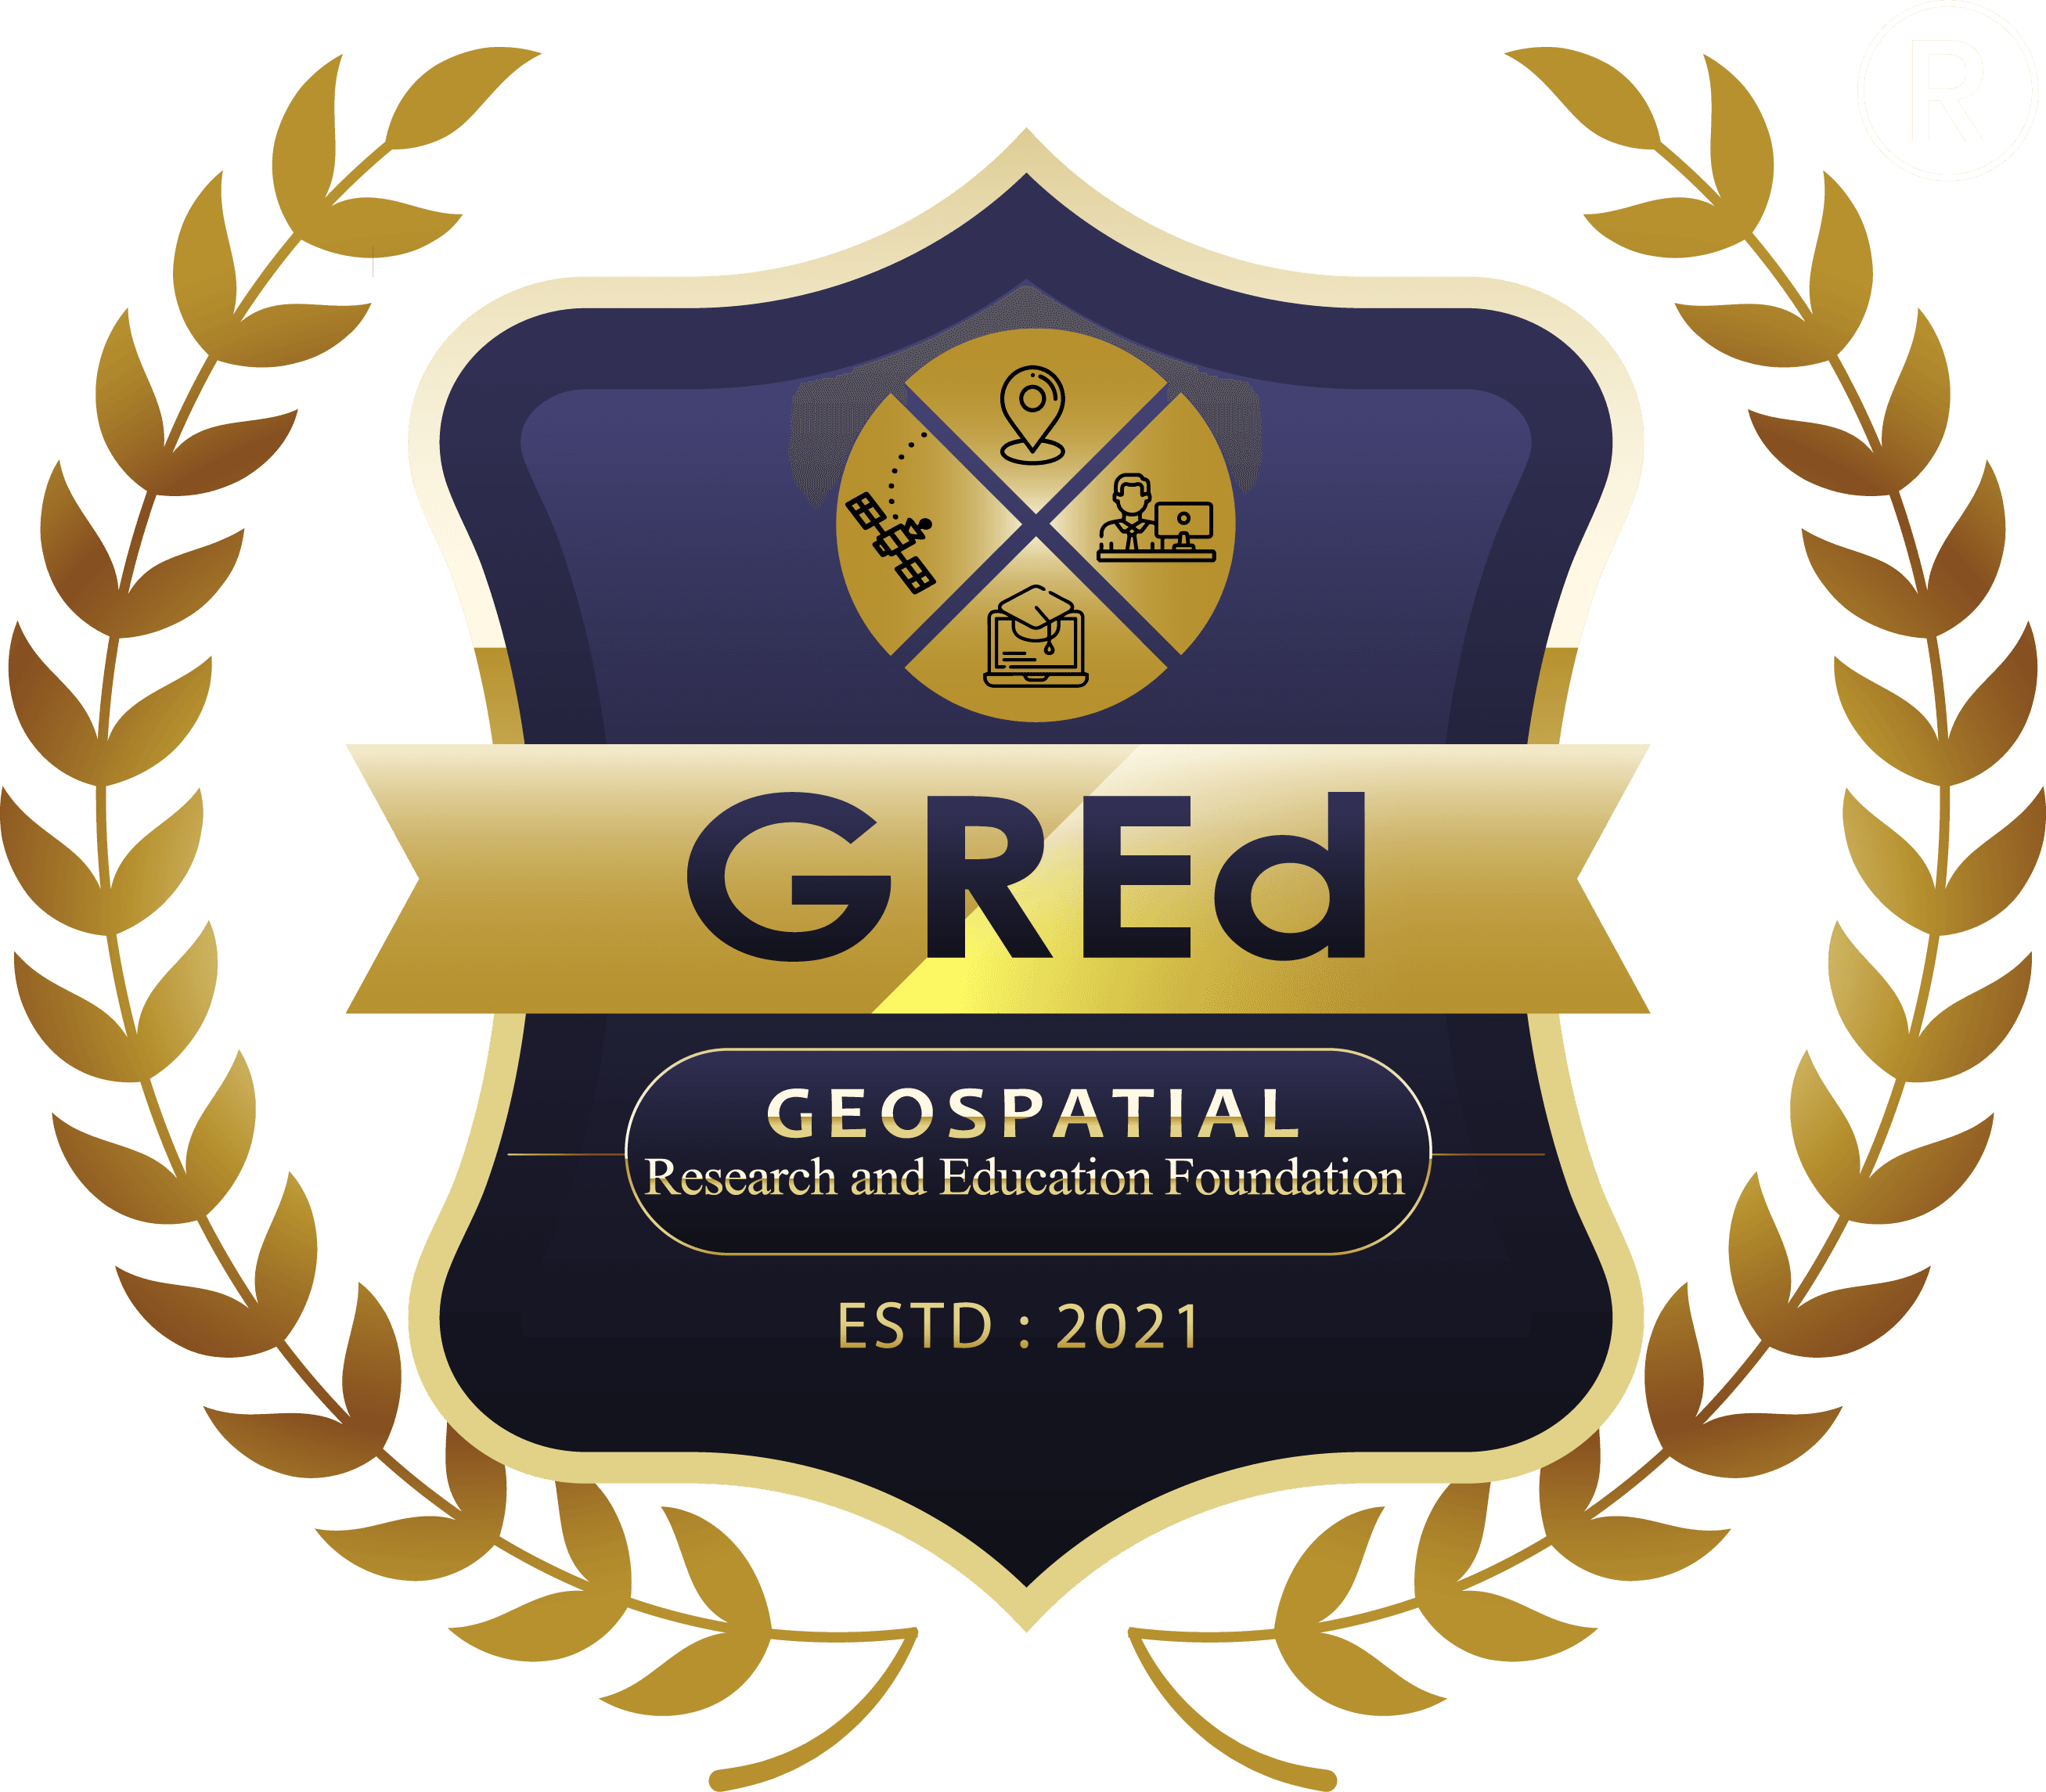 Geospatial Research and Education Foundation